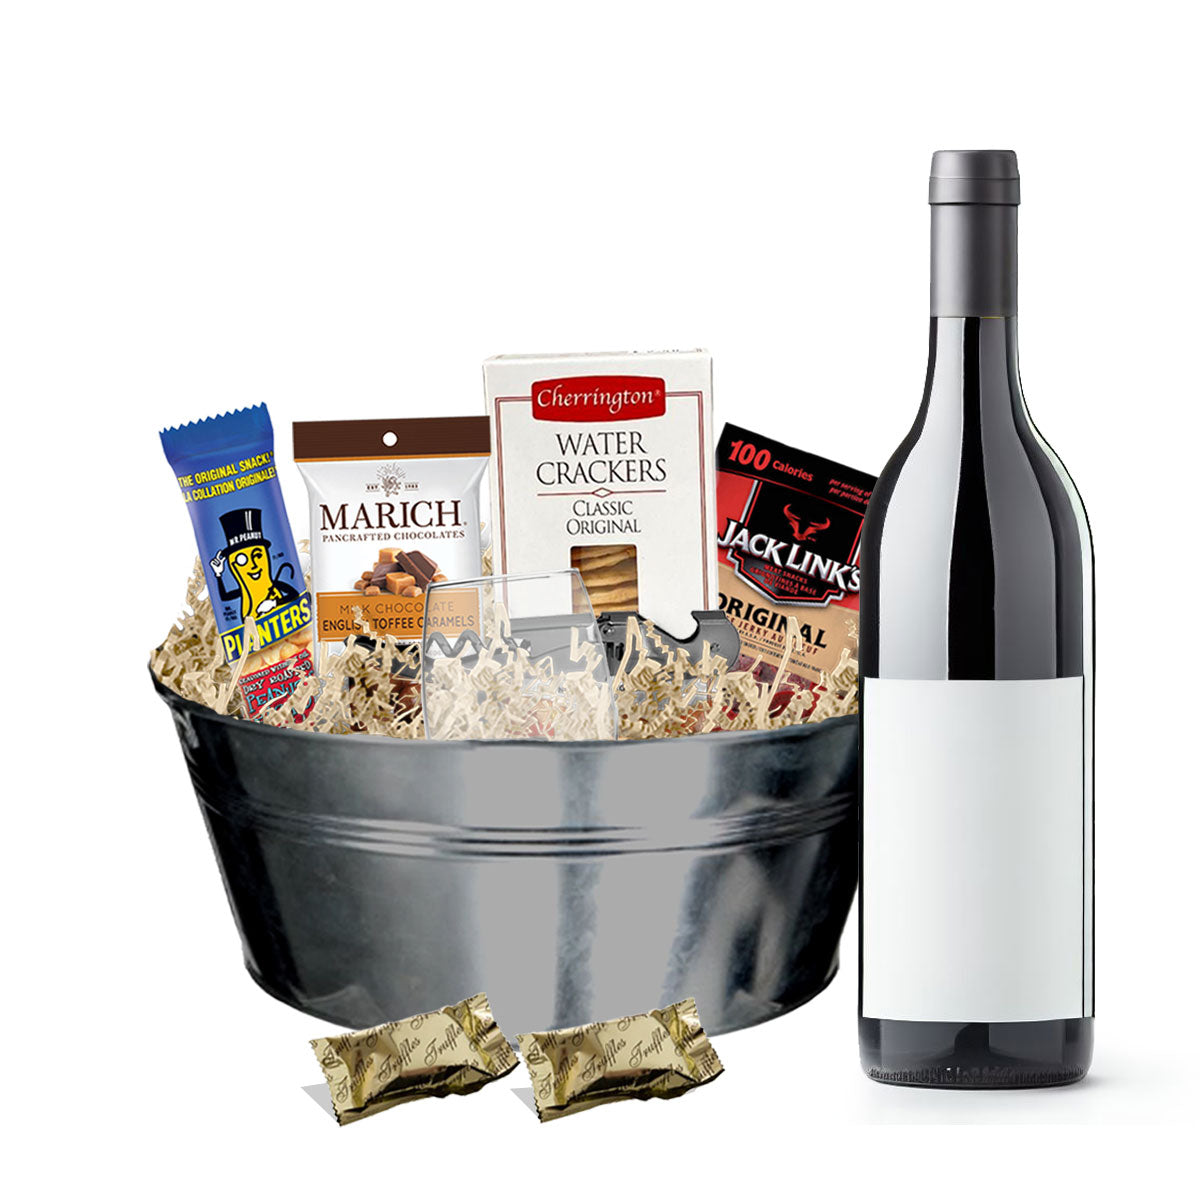 TAG Liquor Stores BC - Aquilini 10000 Hours Red Blend 750ml Gift Basket-wine